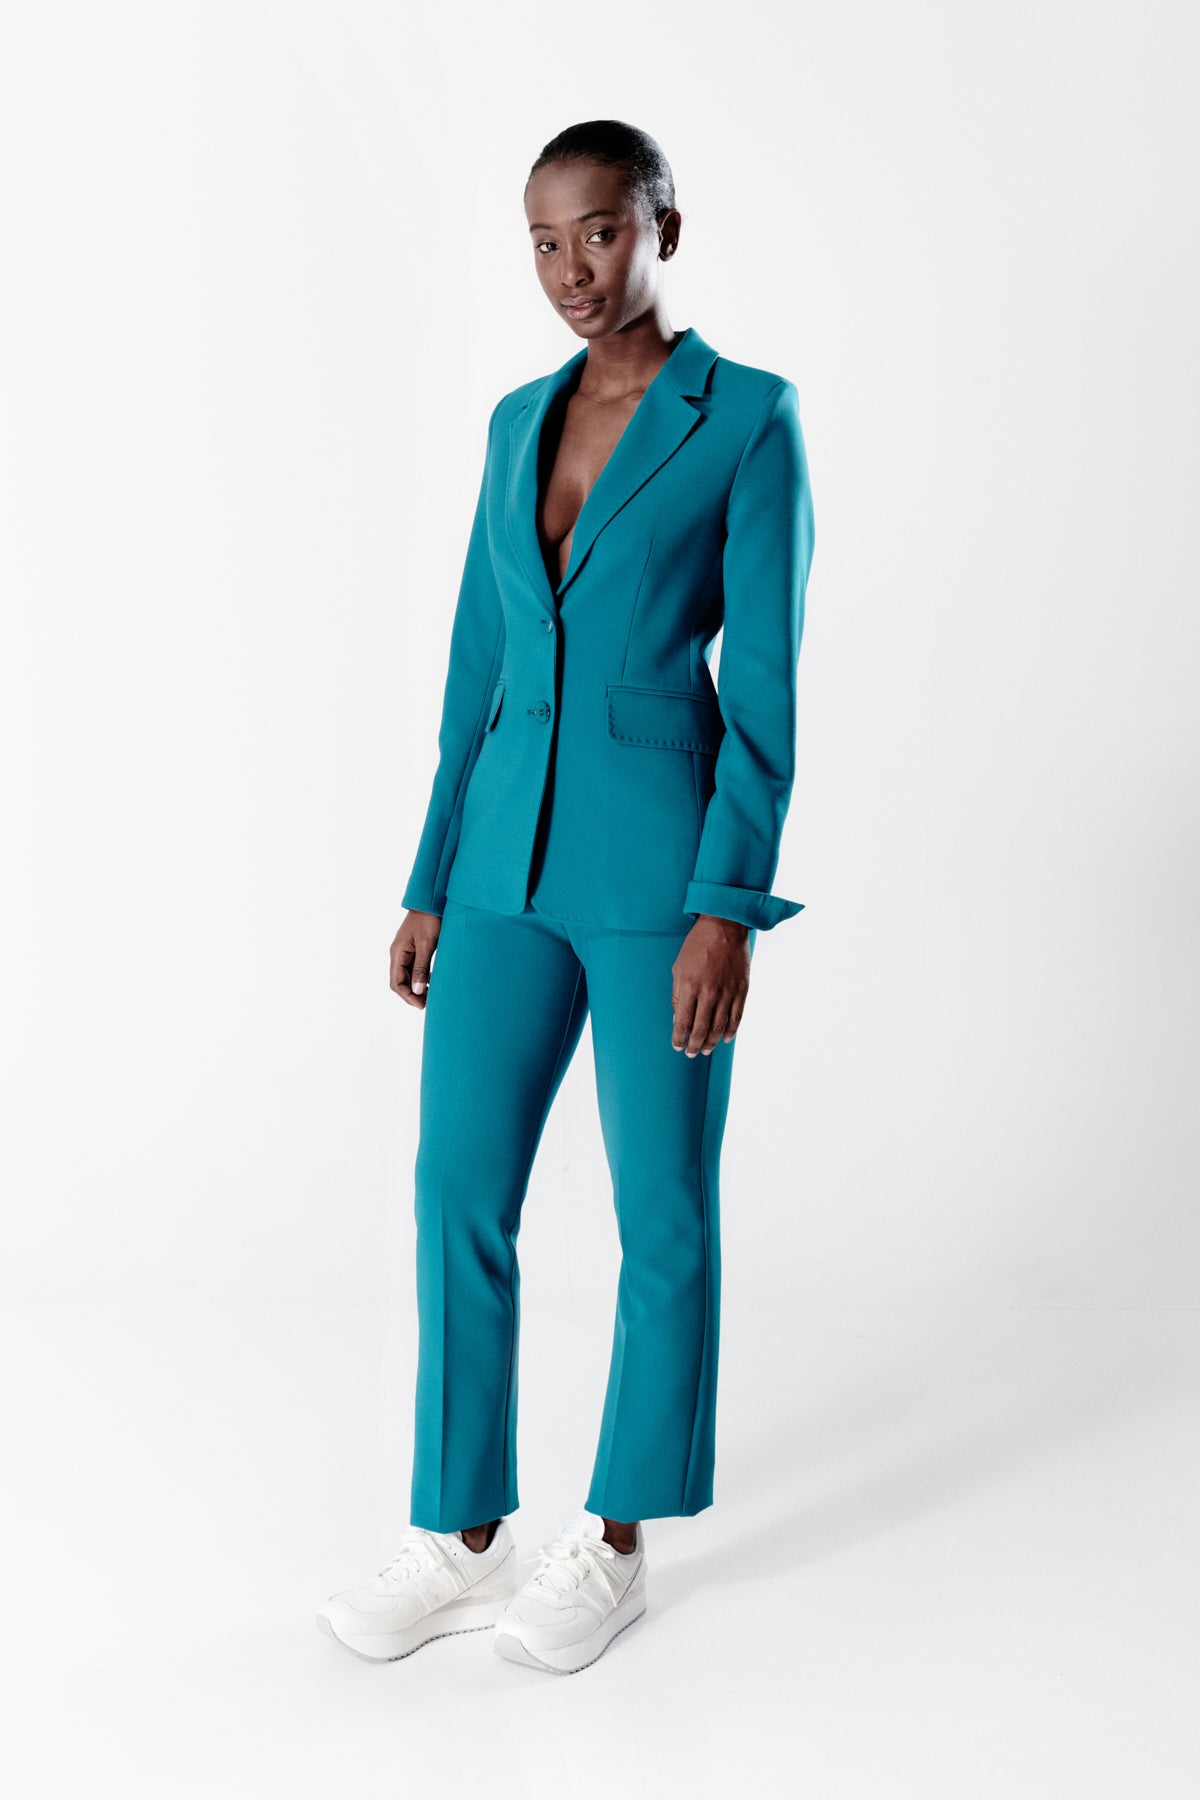 Lily Rose TURQUOISE Suit